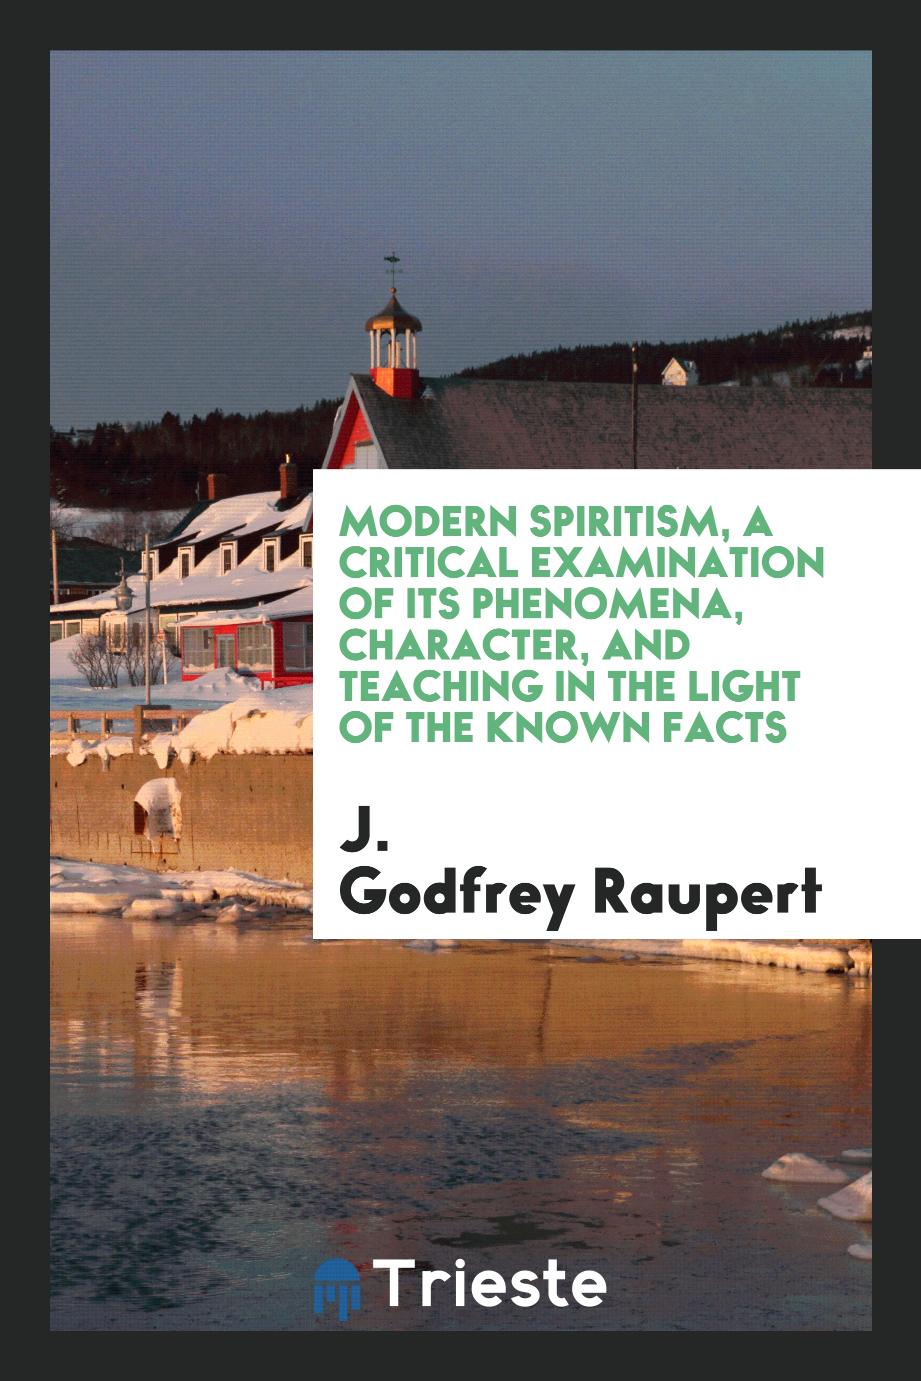 Modern spiritism, a critical examination of its phenomena, character, and teaching in the light of the known facts